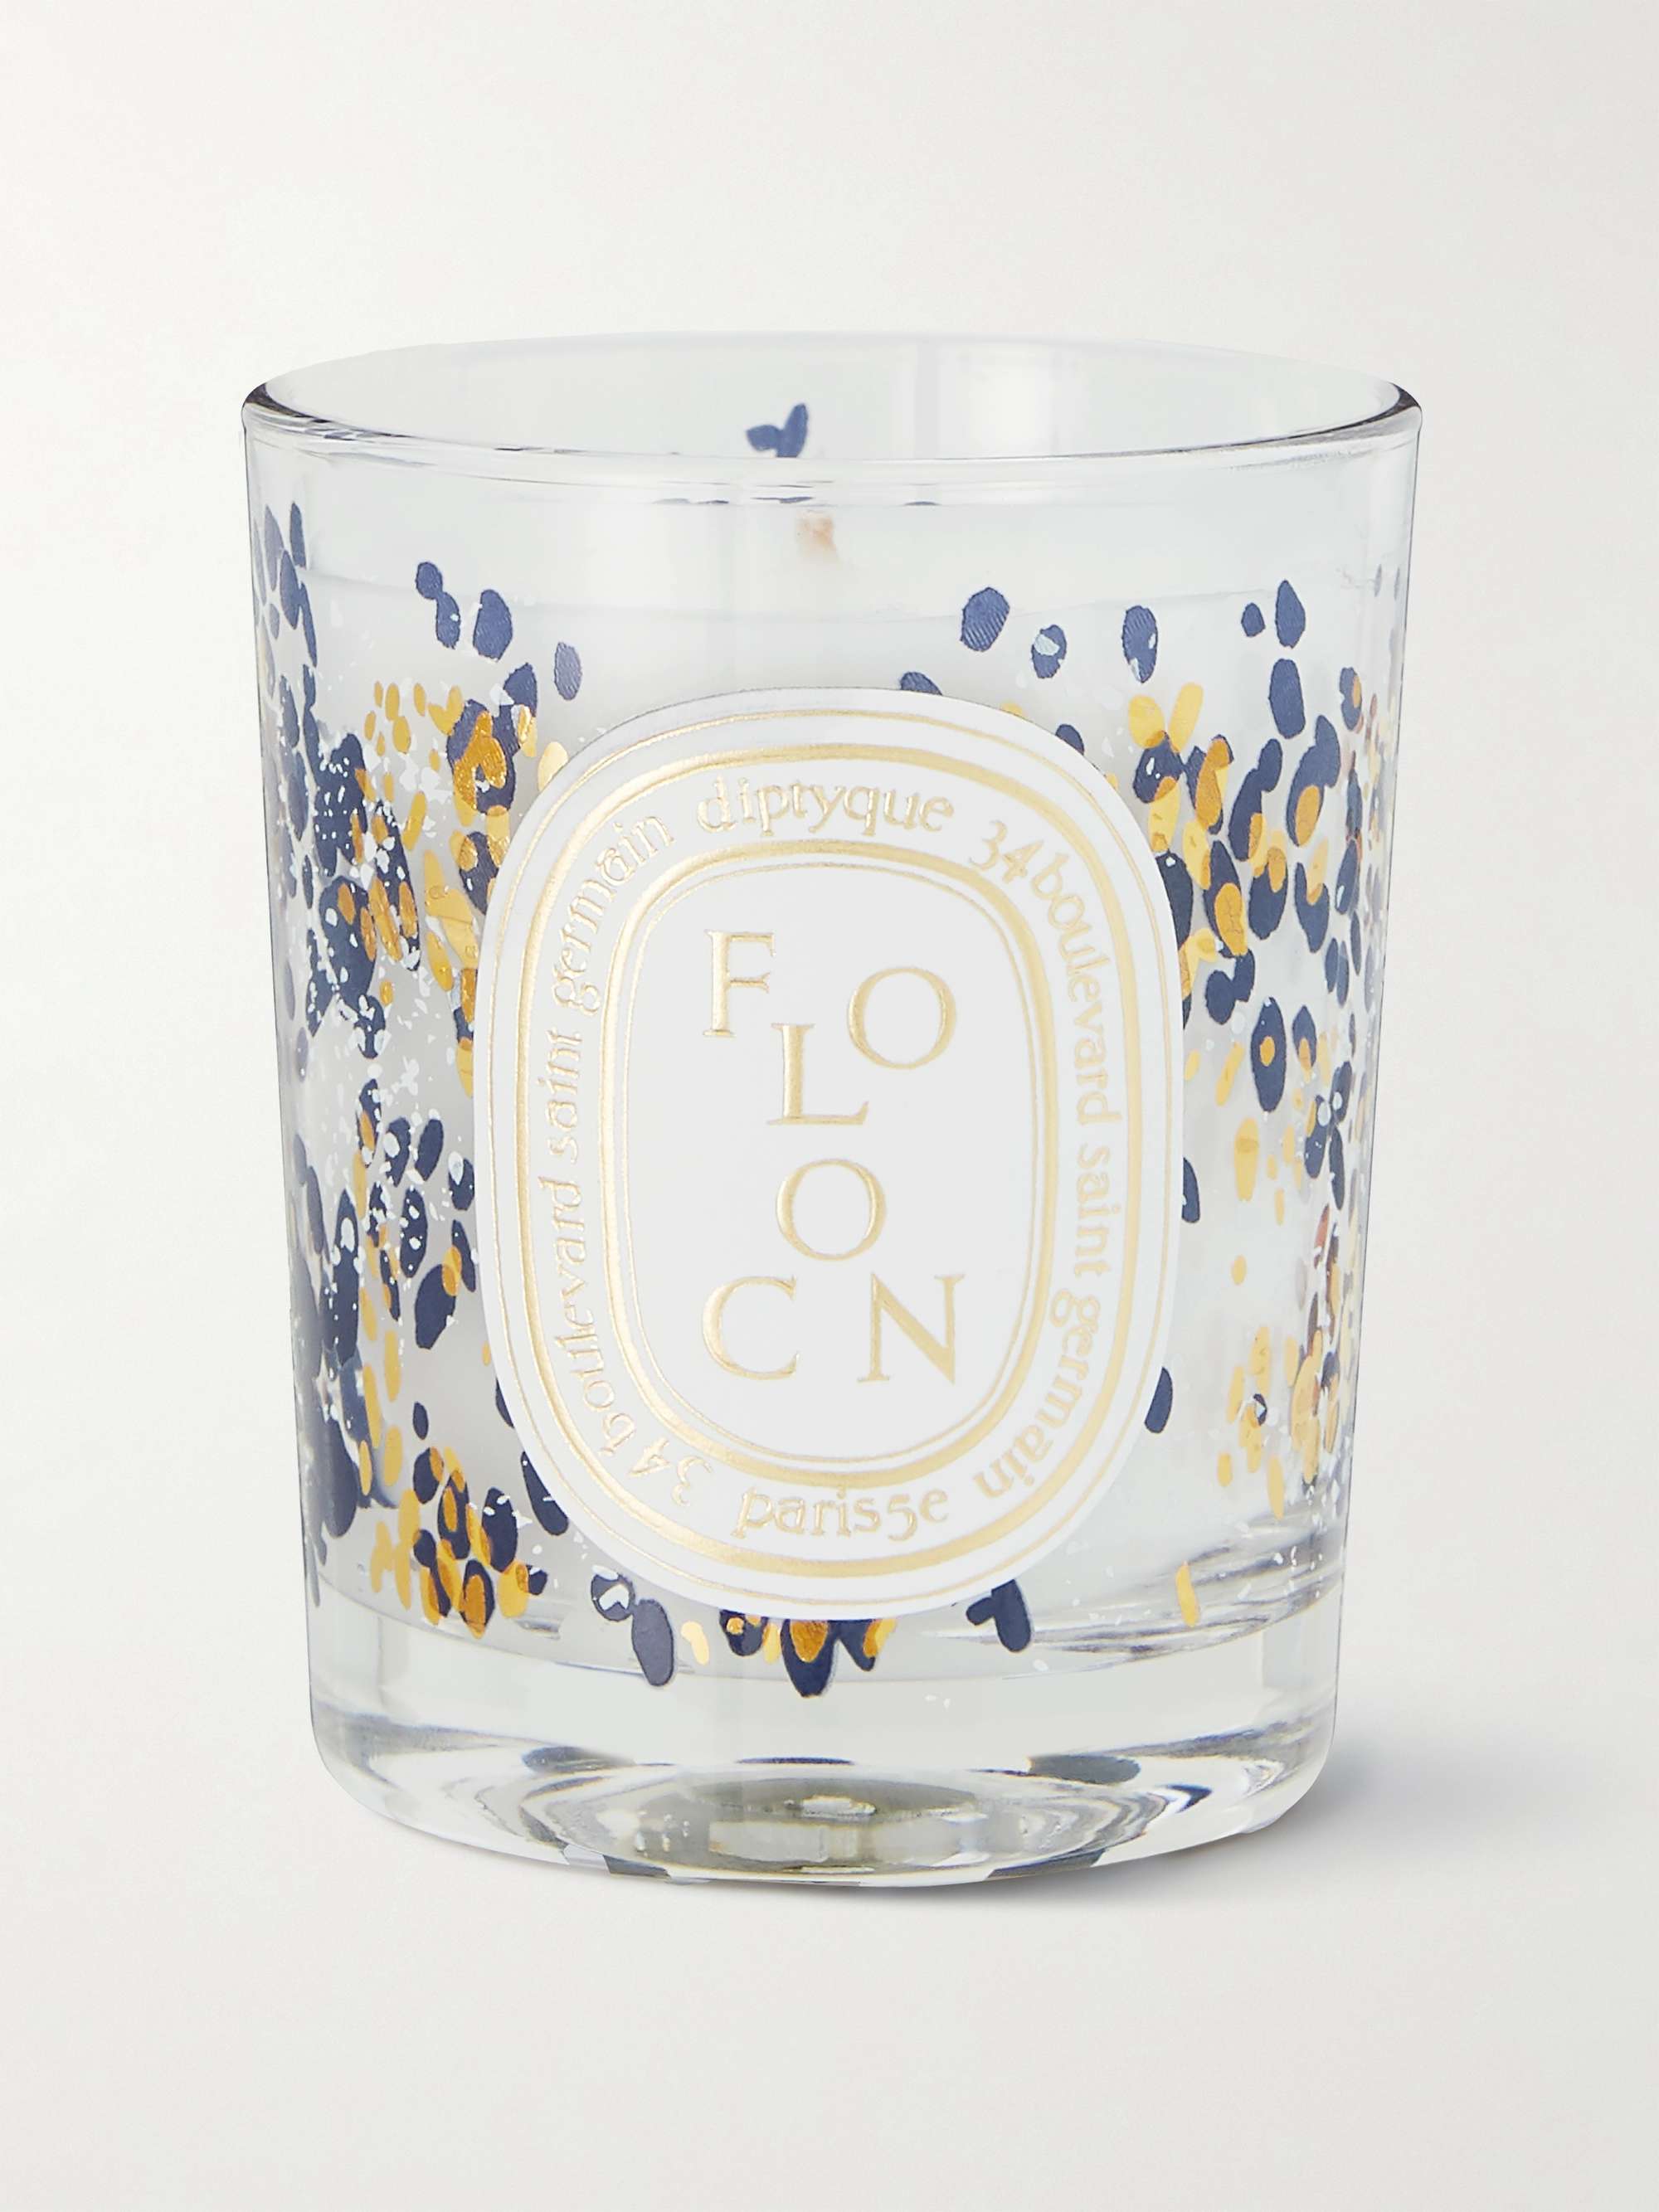 DIPTYQUE Flocon Scented Candle, 70g